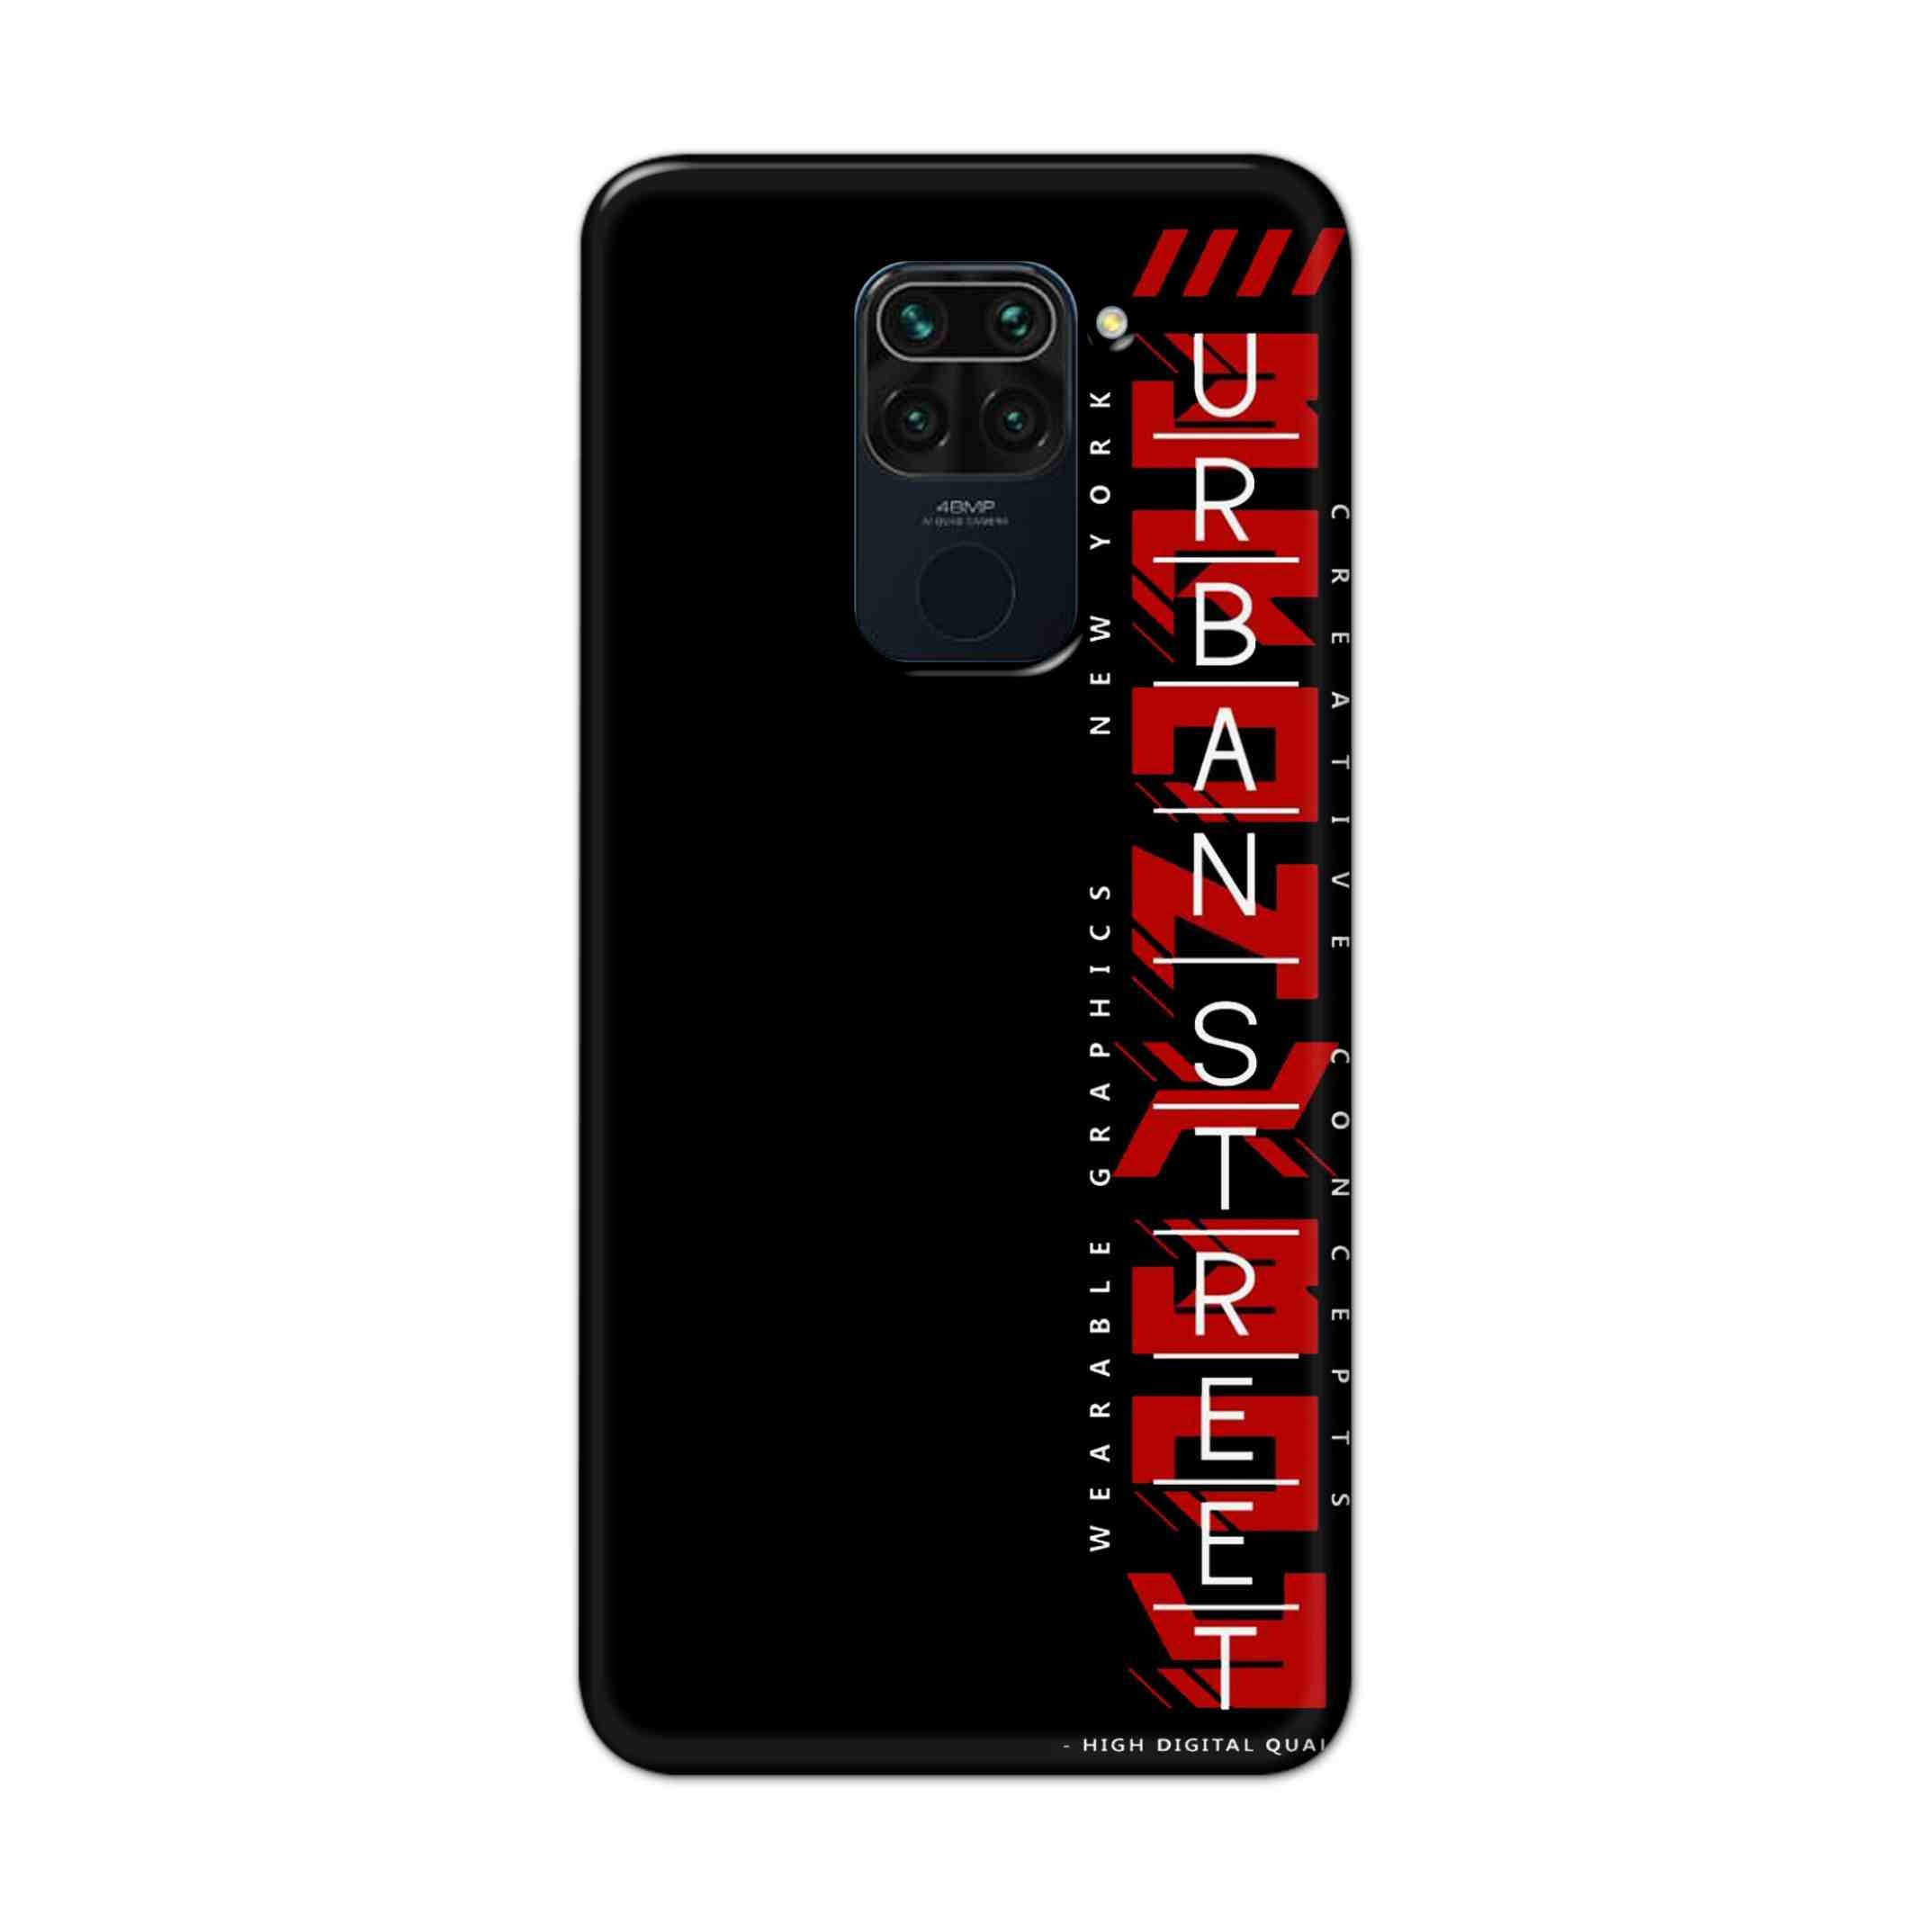 Buy Urban Street Hard Back Mobile Phone Case Cover For Xiaomi Redmi Note 9 Online